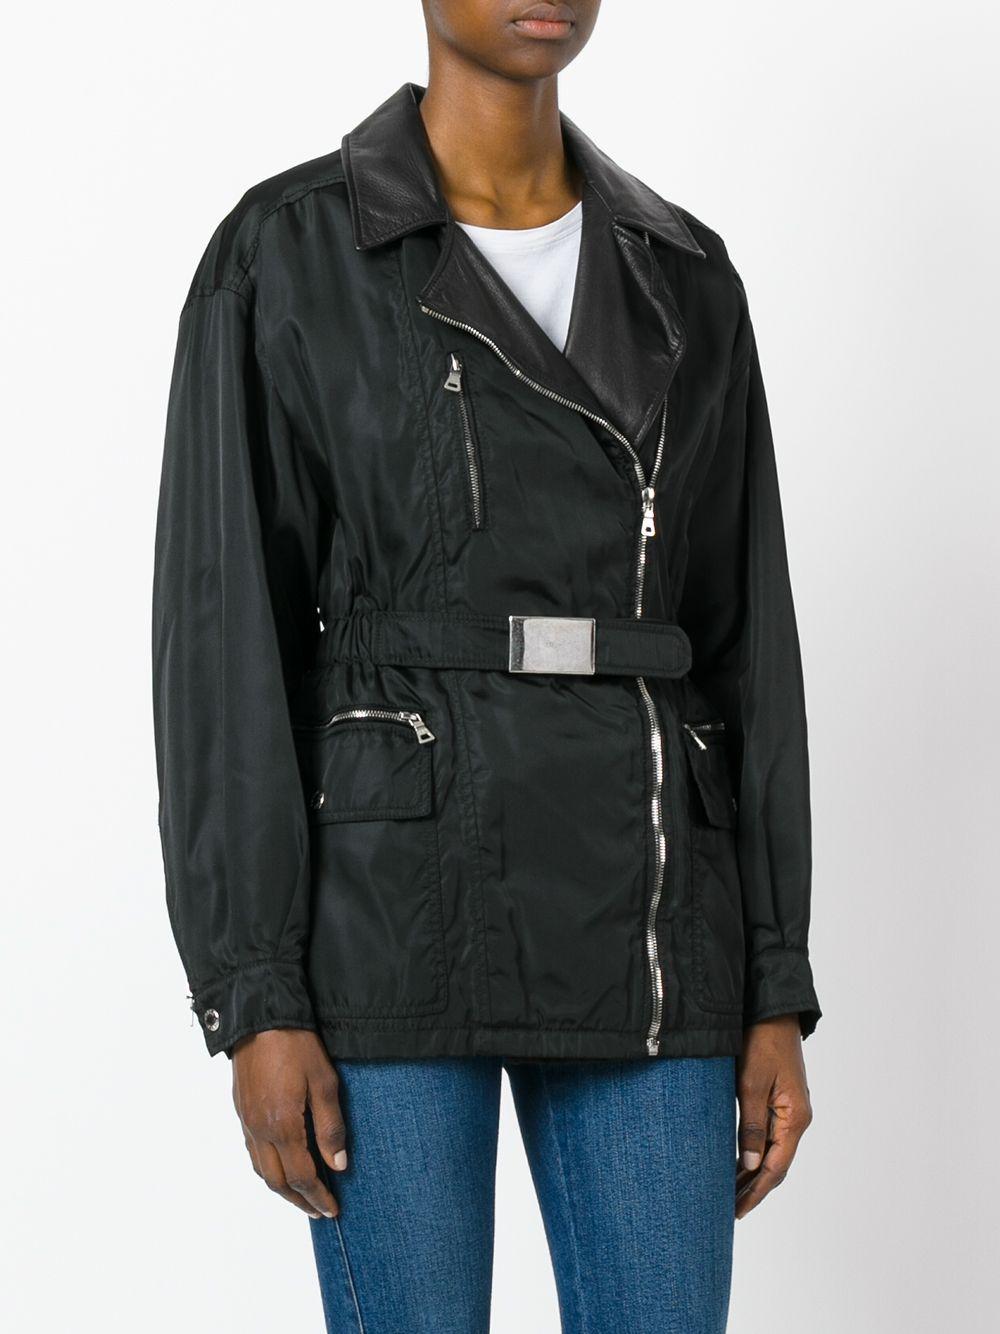 Prada black nylon jacket with leather collar, front zip closure, long sleeves with zip and button on the cuffs, five front pockets, three with zip and two with flap and logoed snap button, belt at the waist.

Years: 90s

Made in Italy

Size: 46